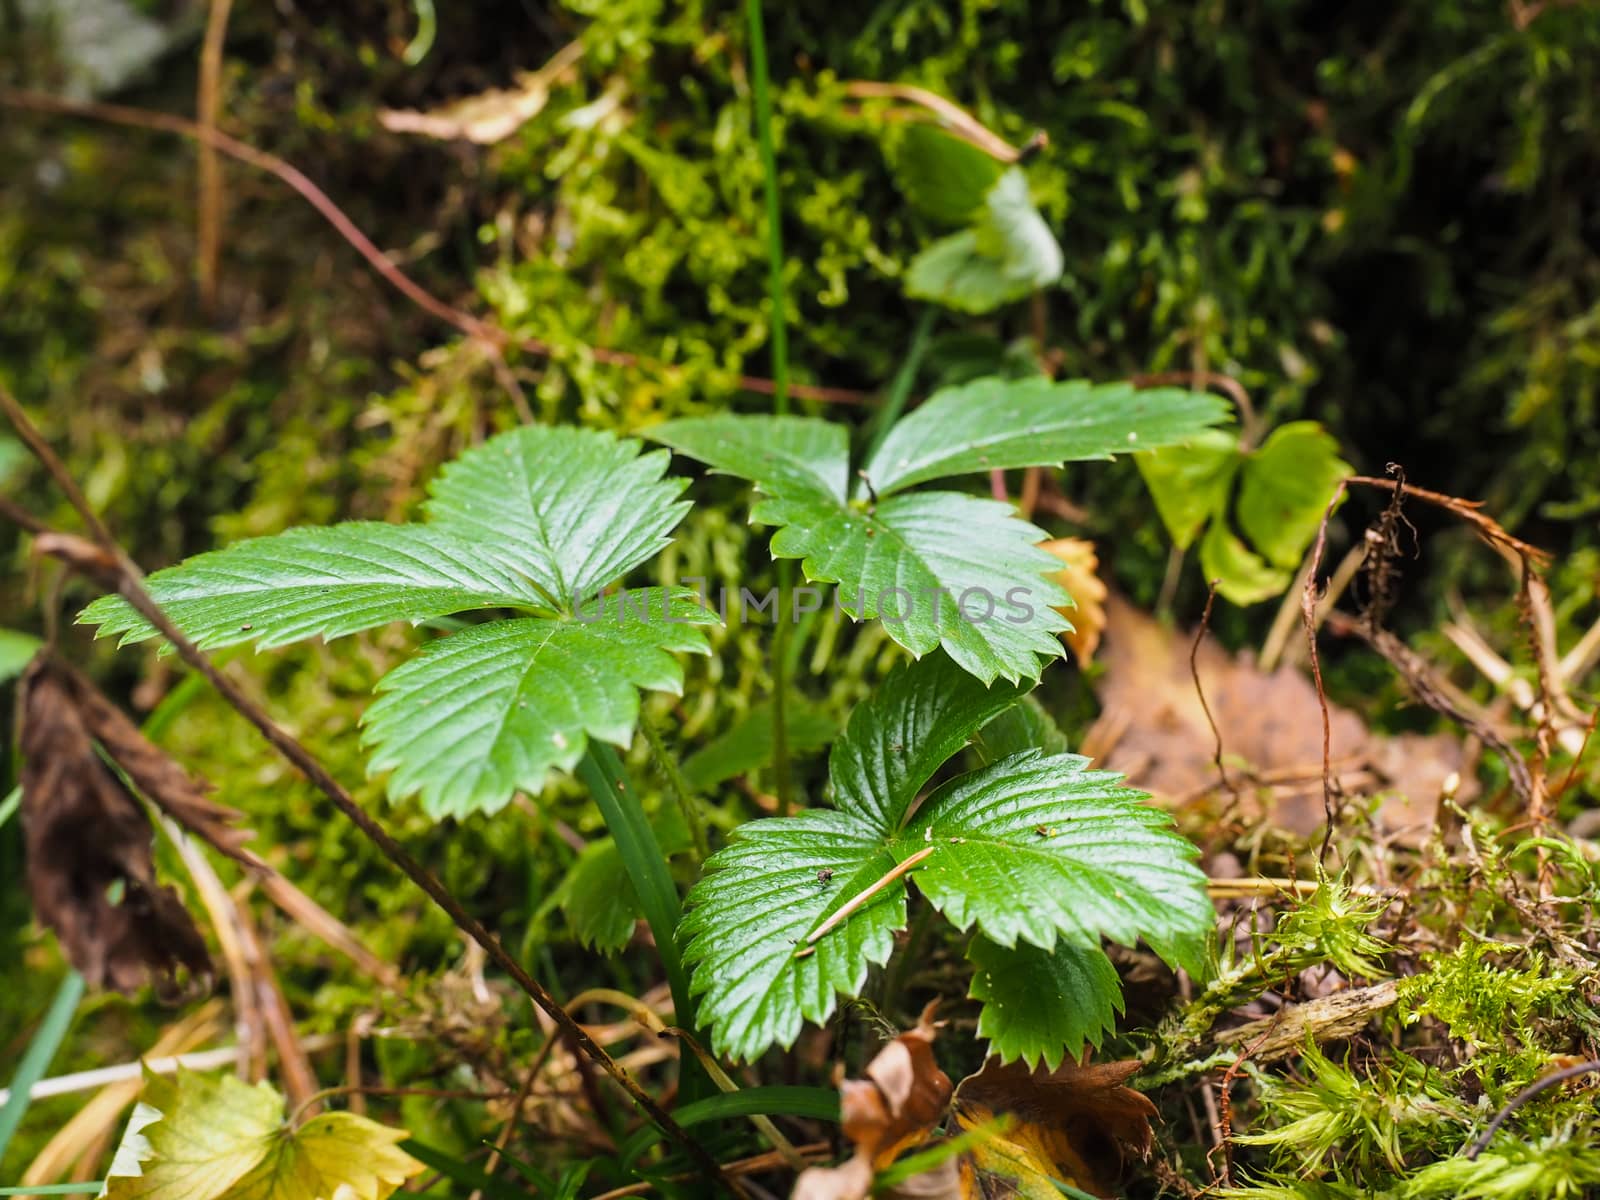 Wild green strawberry plant in forest over moss and lichen